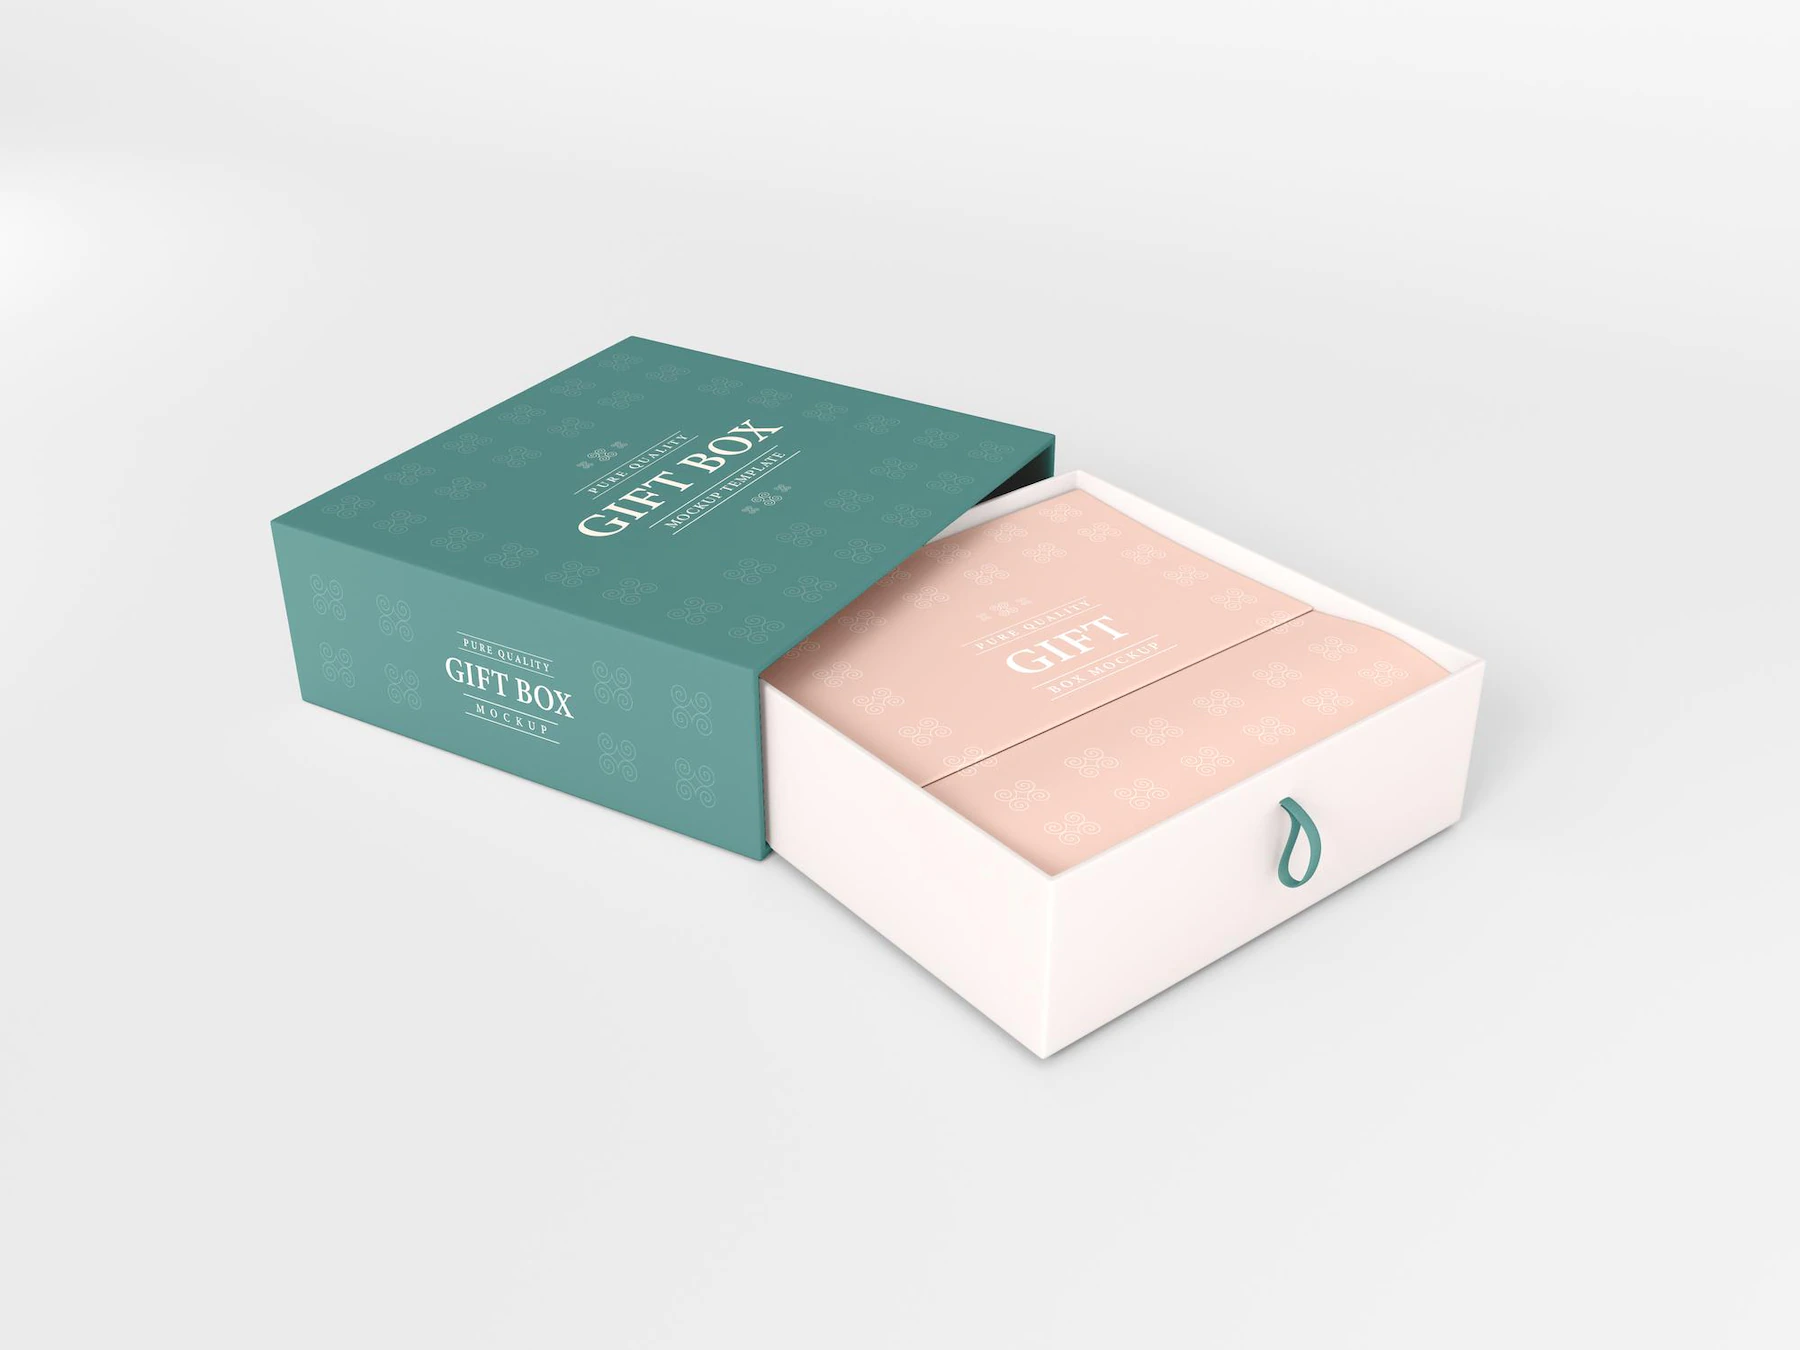 square gift box with cover mockup 439185 3345